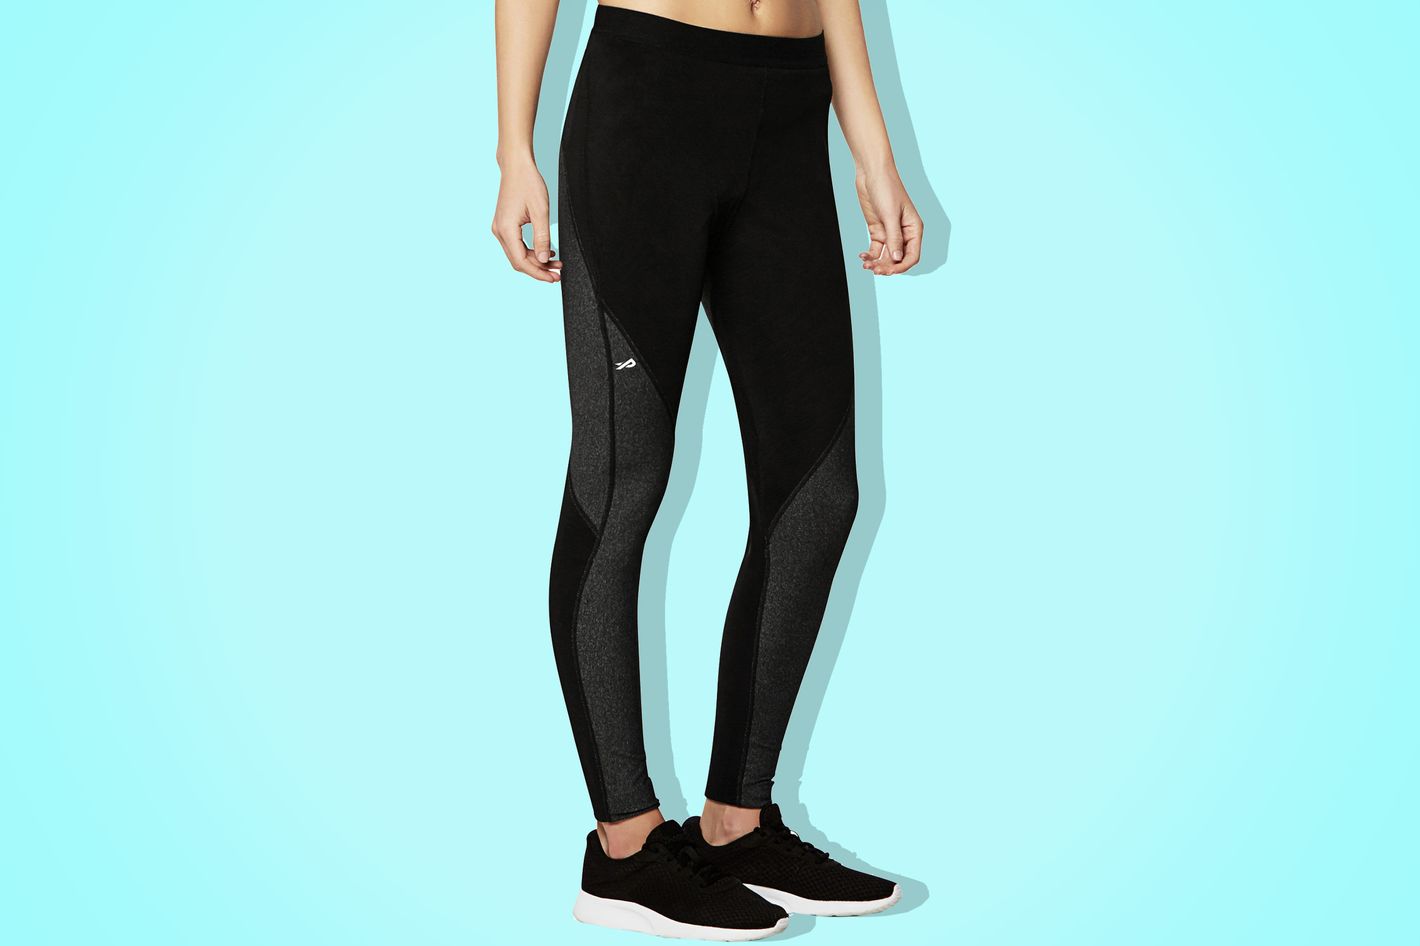 physiclo pro resistance tights in black - strategist best fitness gear and best resistance leggings for women